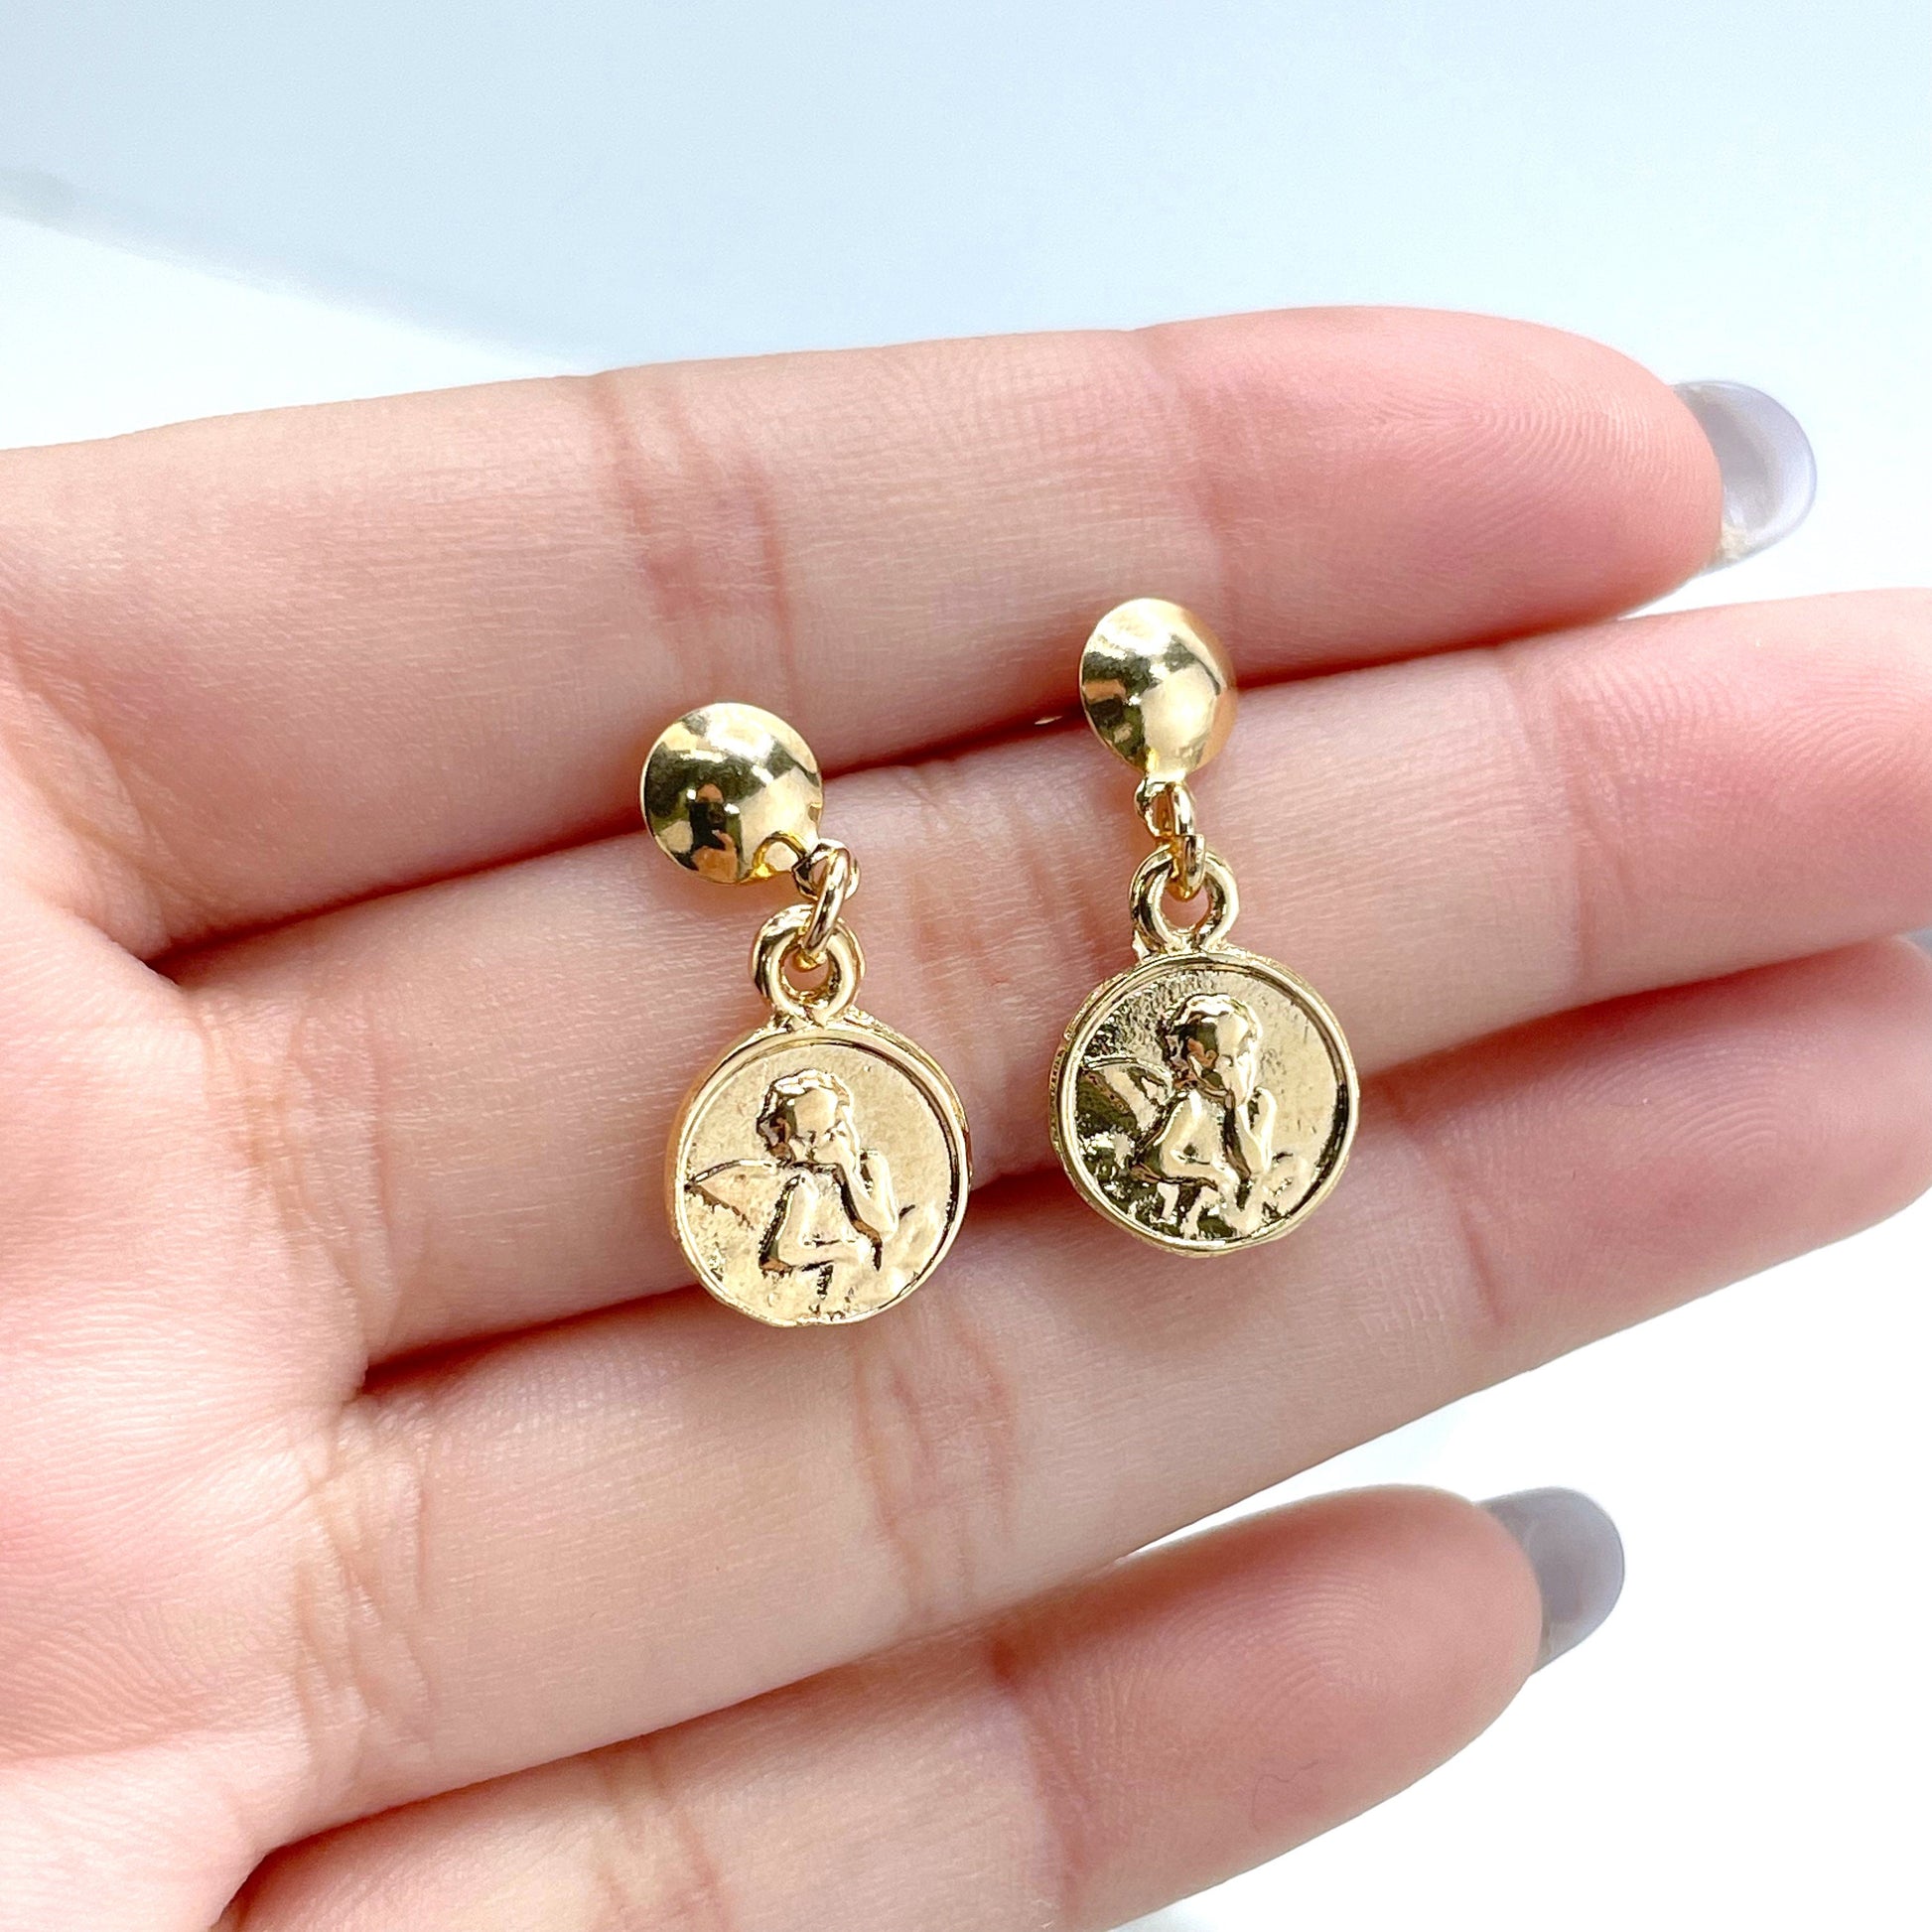 18k Gold Filled Double Curb Link and Paperclip Link, San Miguel, Jesus Christ & St. Expedite Medals Bracelet or Angel Earring Wholesale